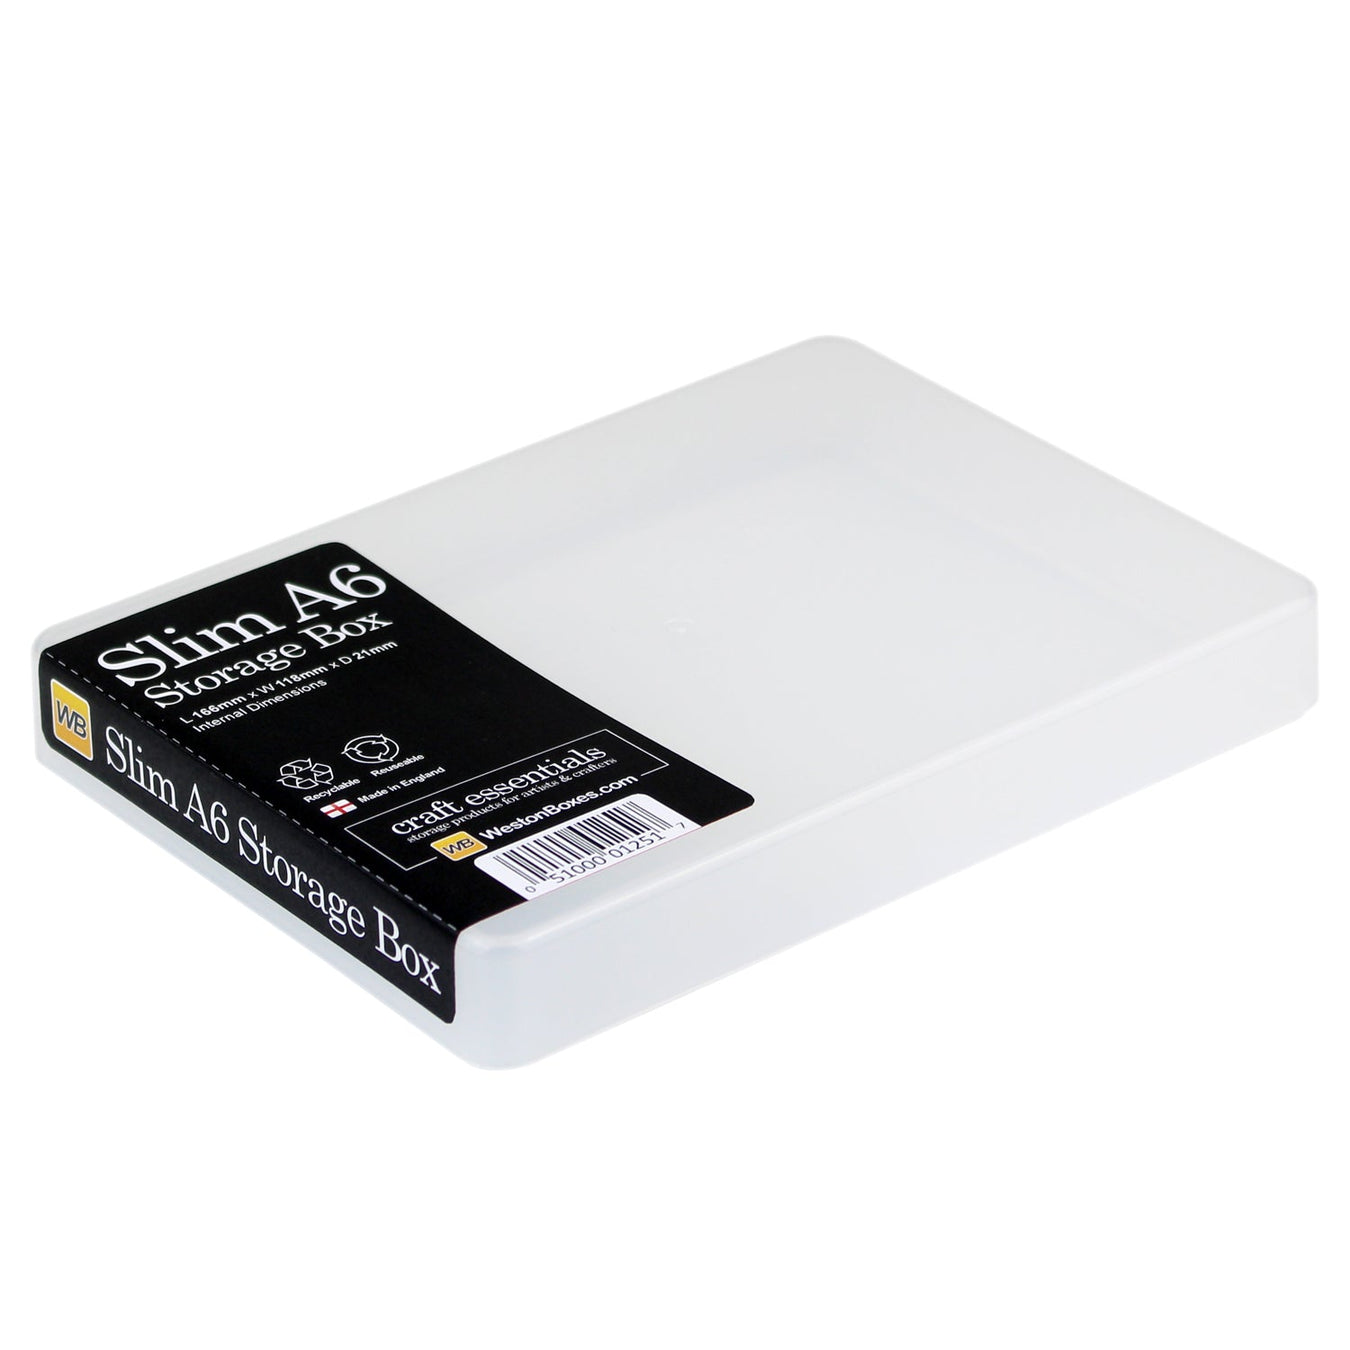 plastic a6 paper and c6 envelope storage box with drop on lid